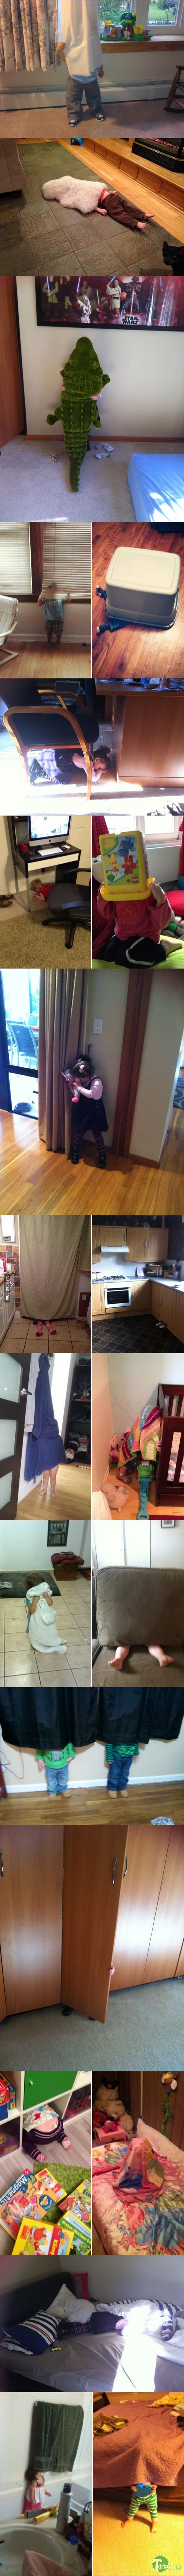 Kids who completely suck at hide and seek